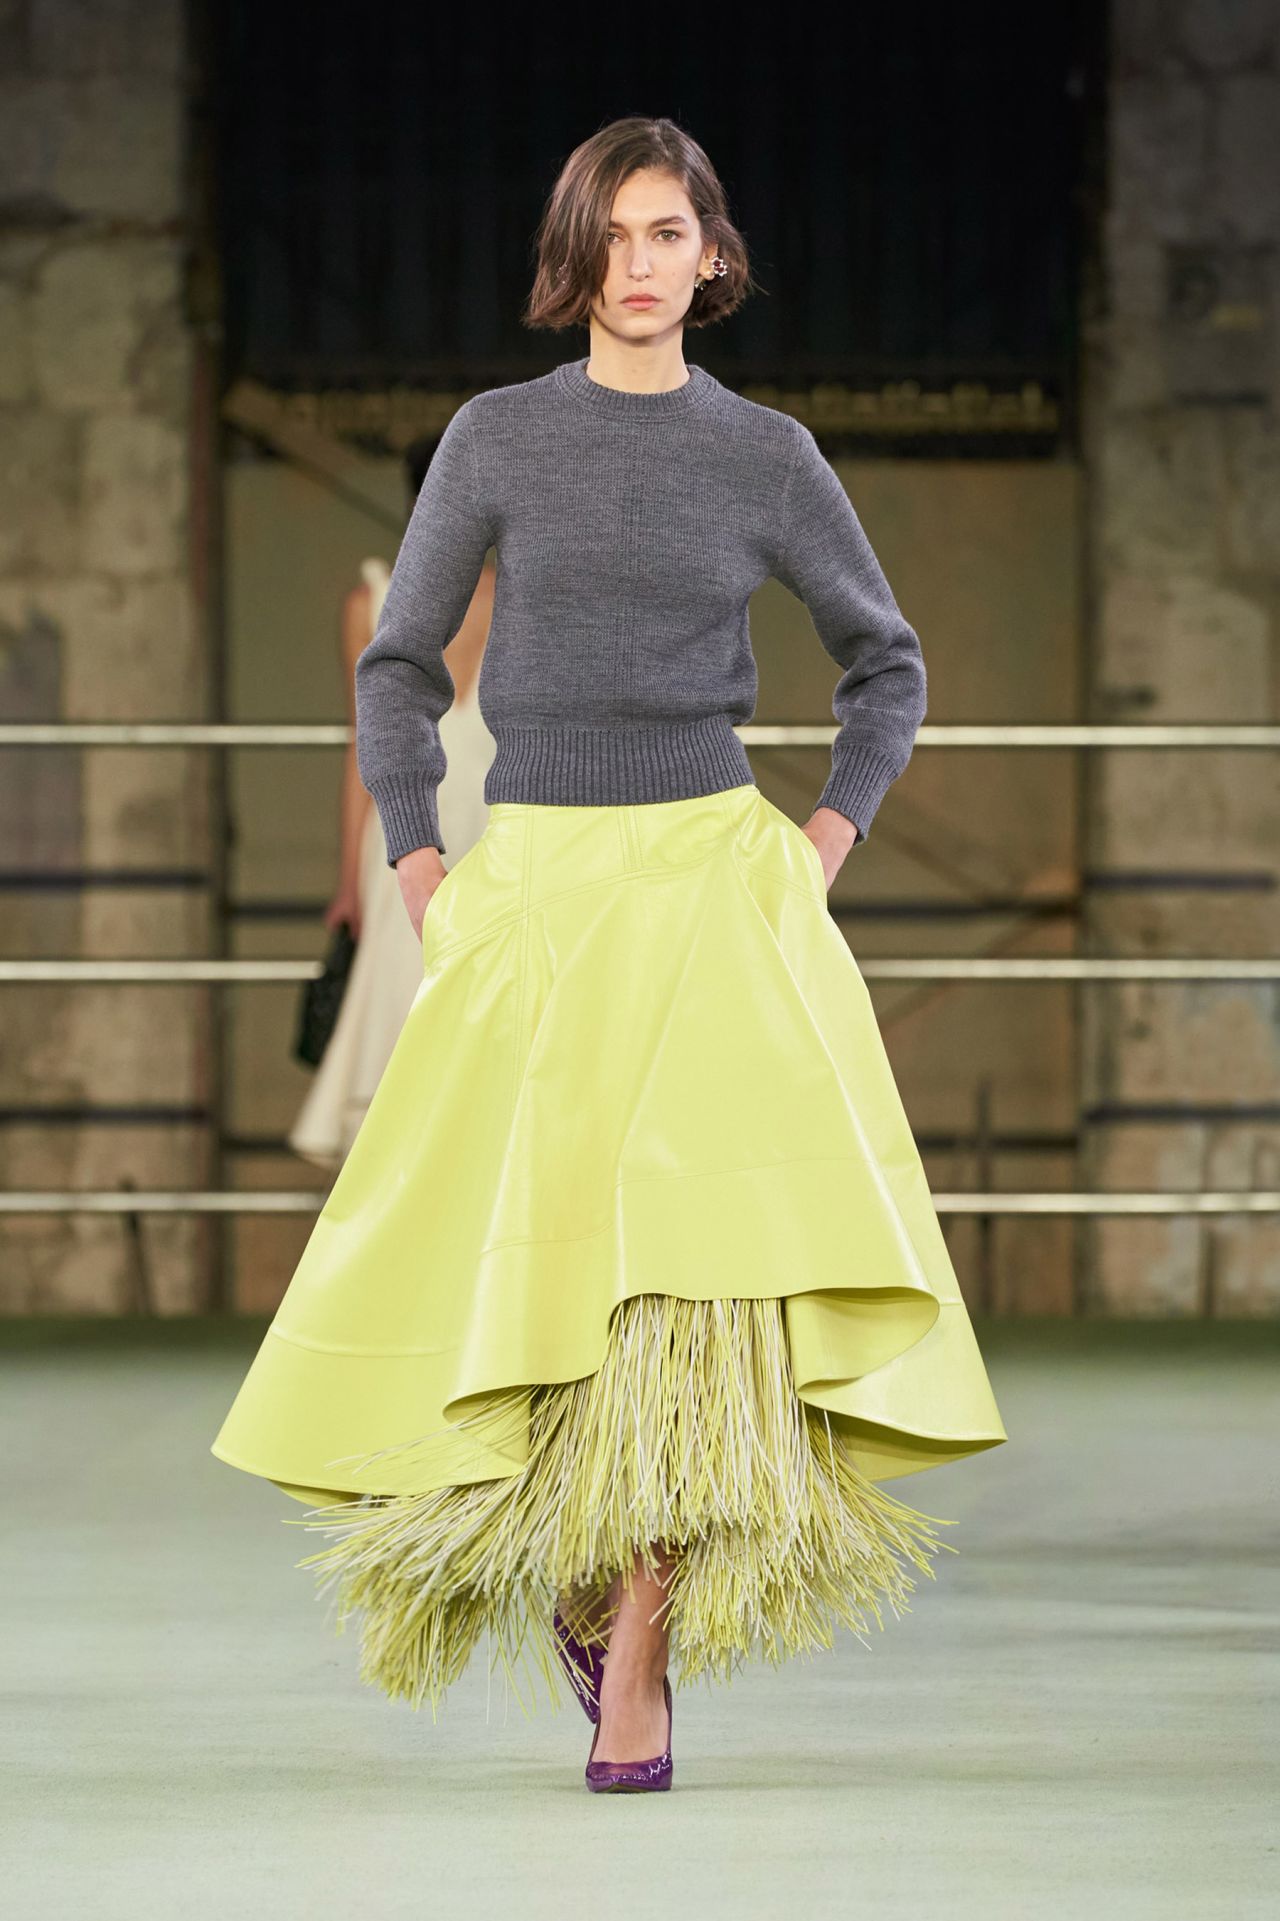 The fringe-filled circle skirts were among the boldest looks of the collection.